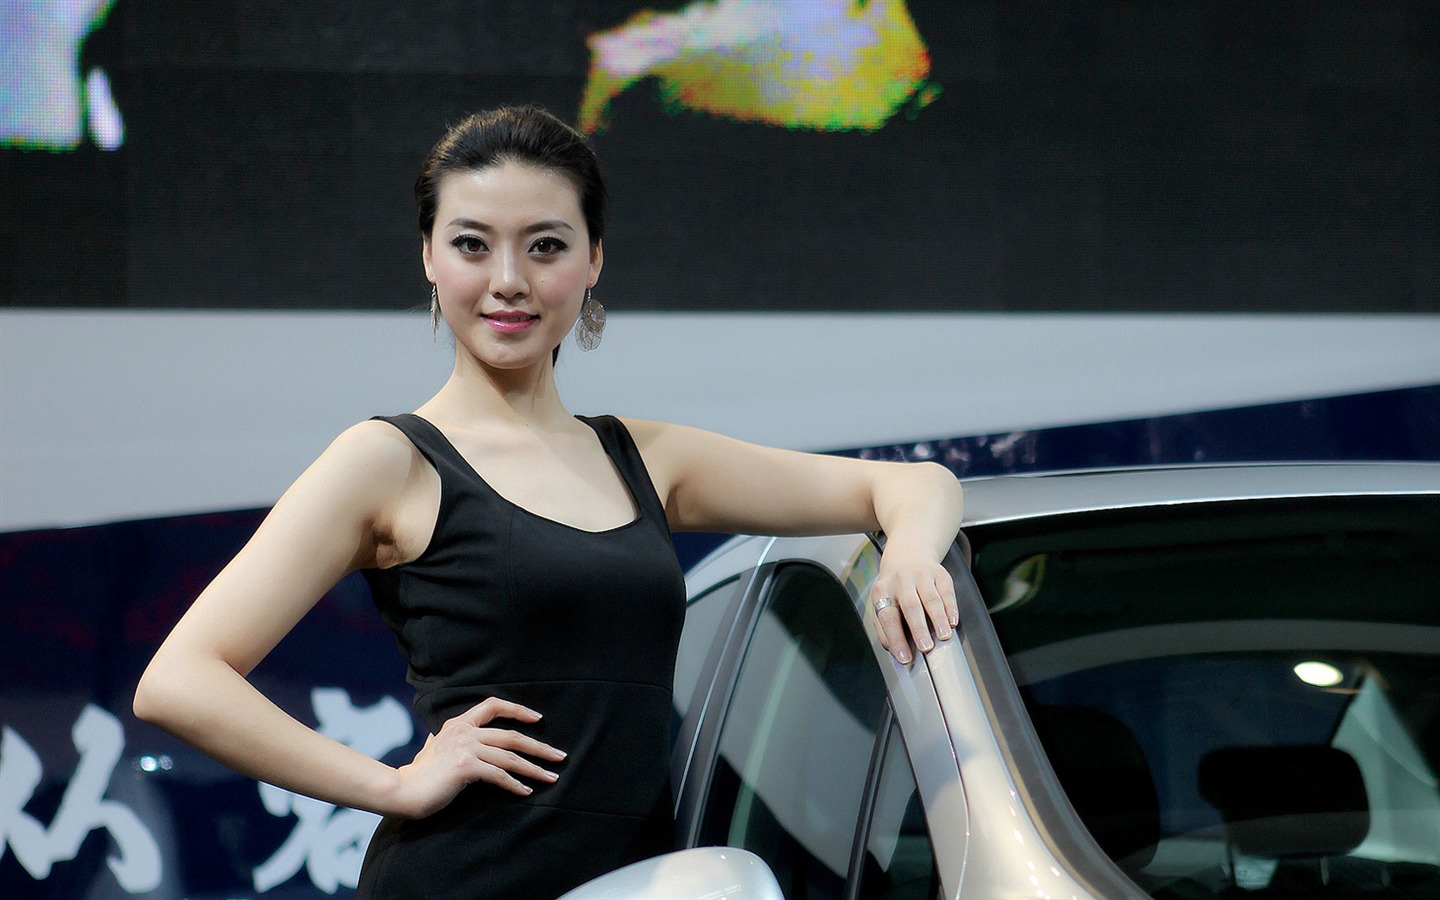 2010 Beijing Auto Show car models Collection (2) #10 - 1440x900